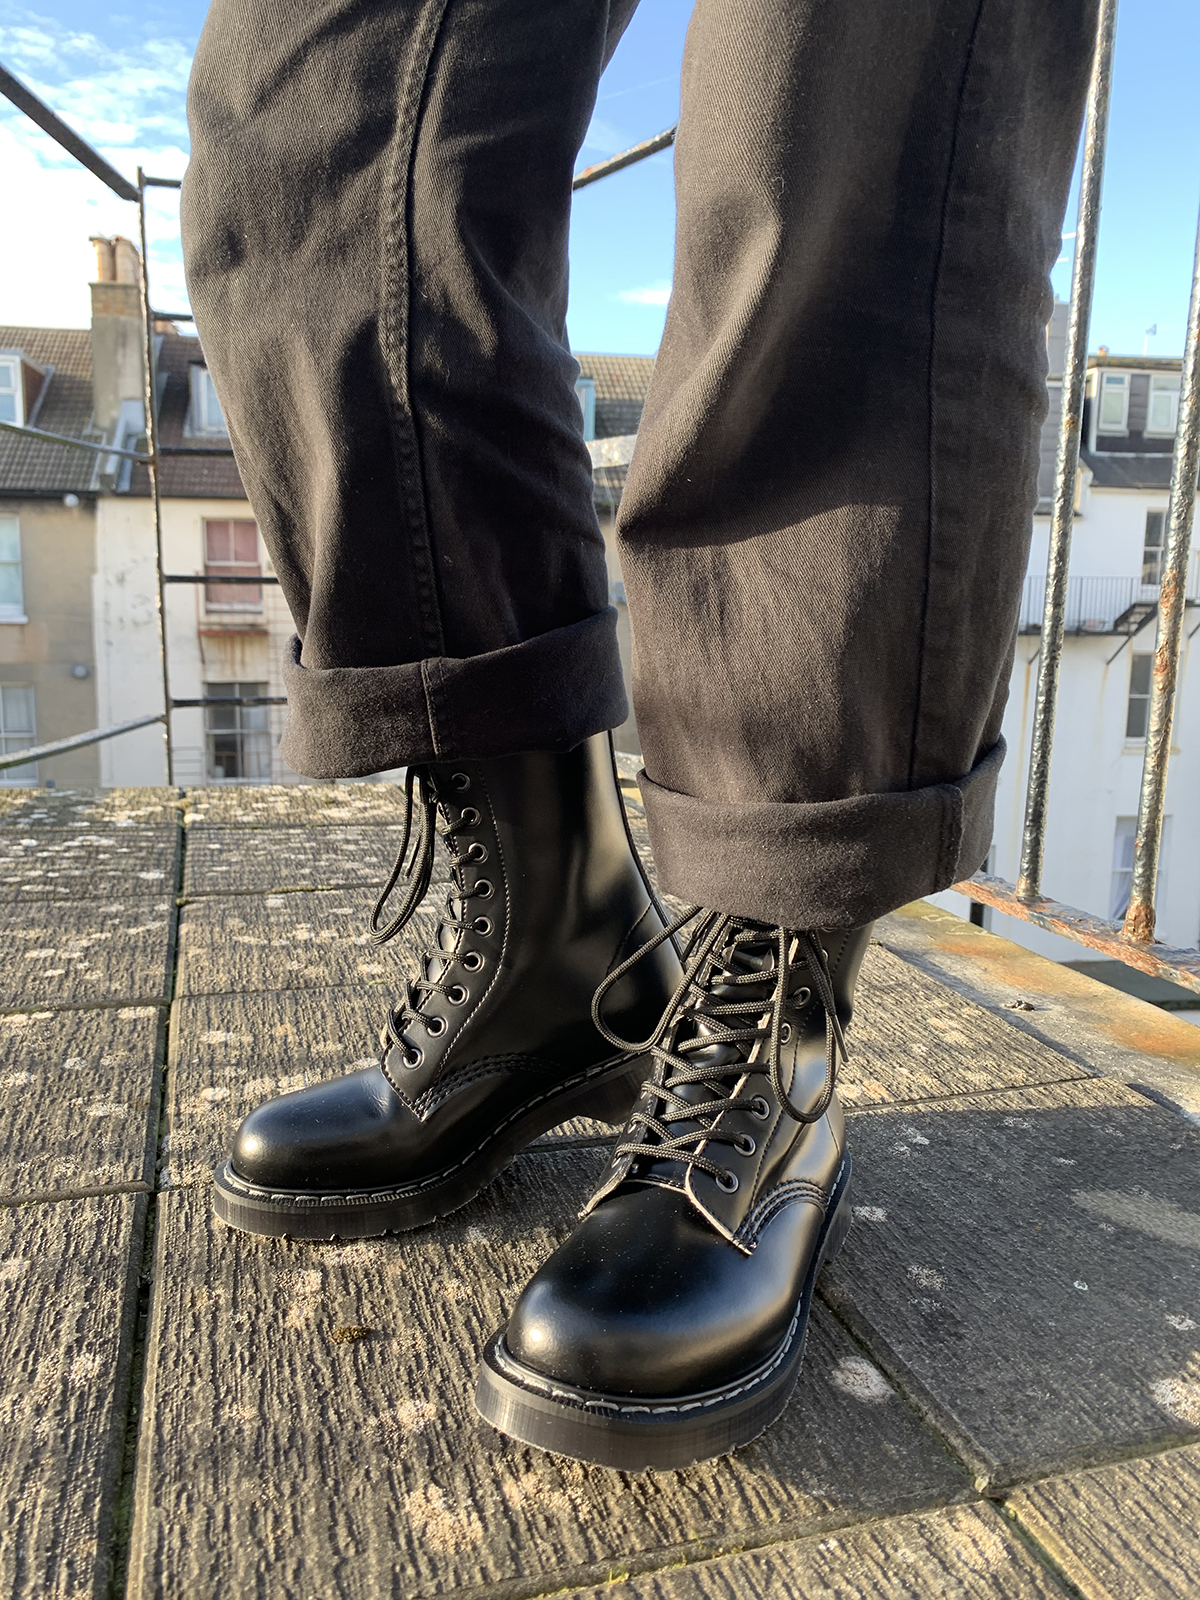 Will report back with results, trying out Vegetarian Shoes airseal boots!  Got them light used for a good price, curious about if they'll last :  r/DrMartens